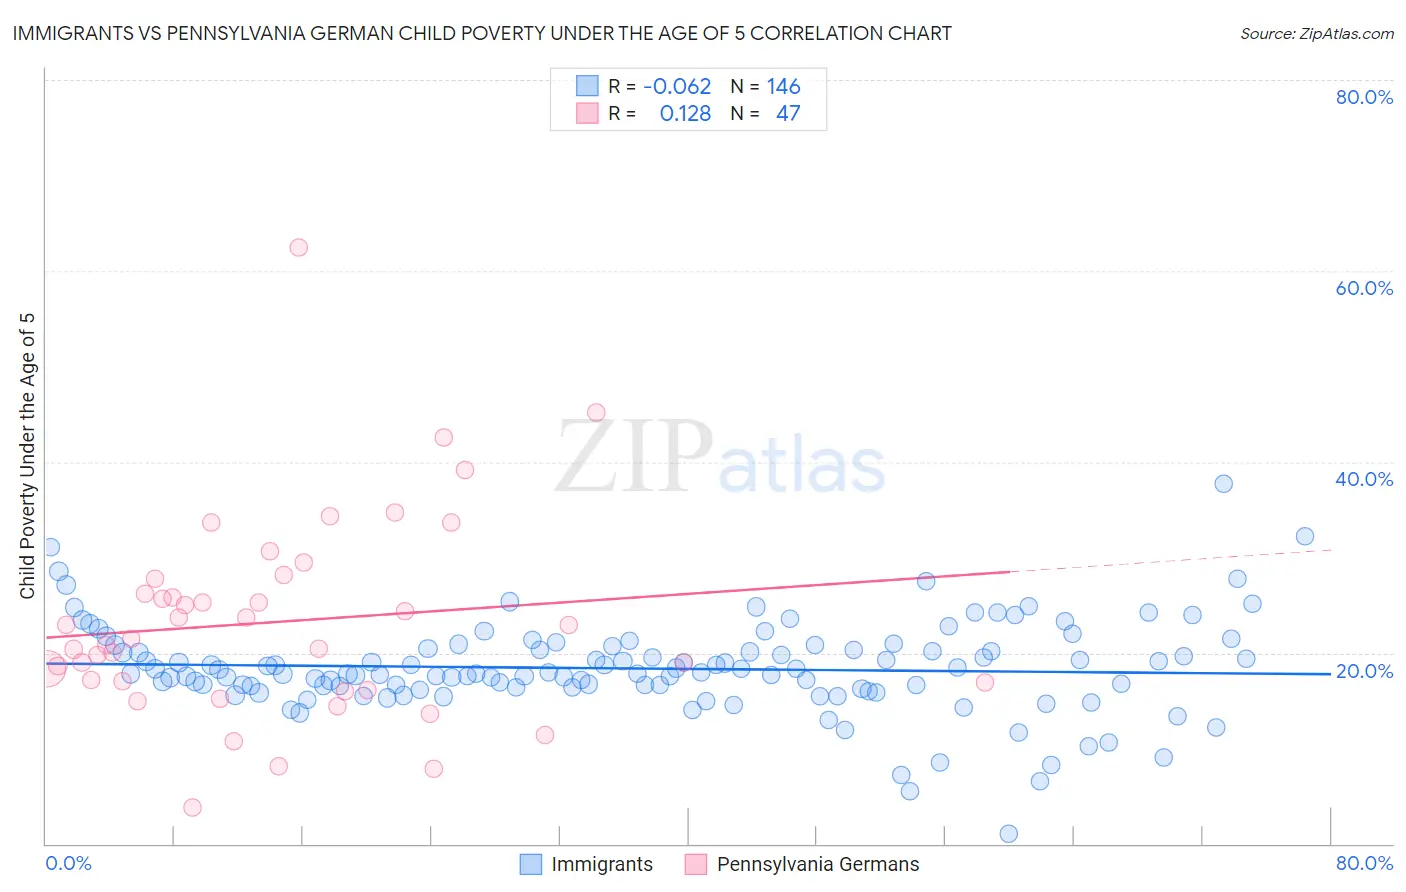 Immigrants vs Pennsylvania German Child Poverty Under the Age of 5